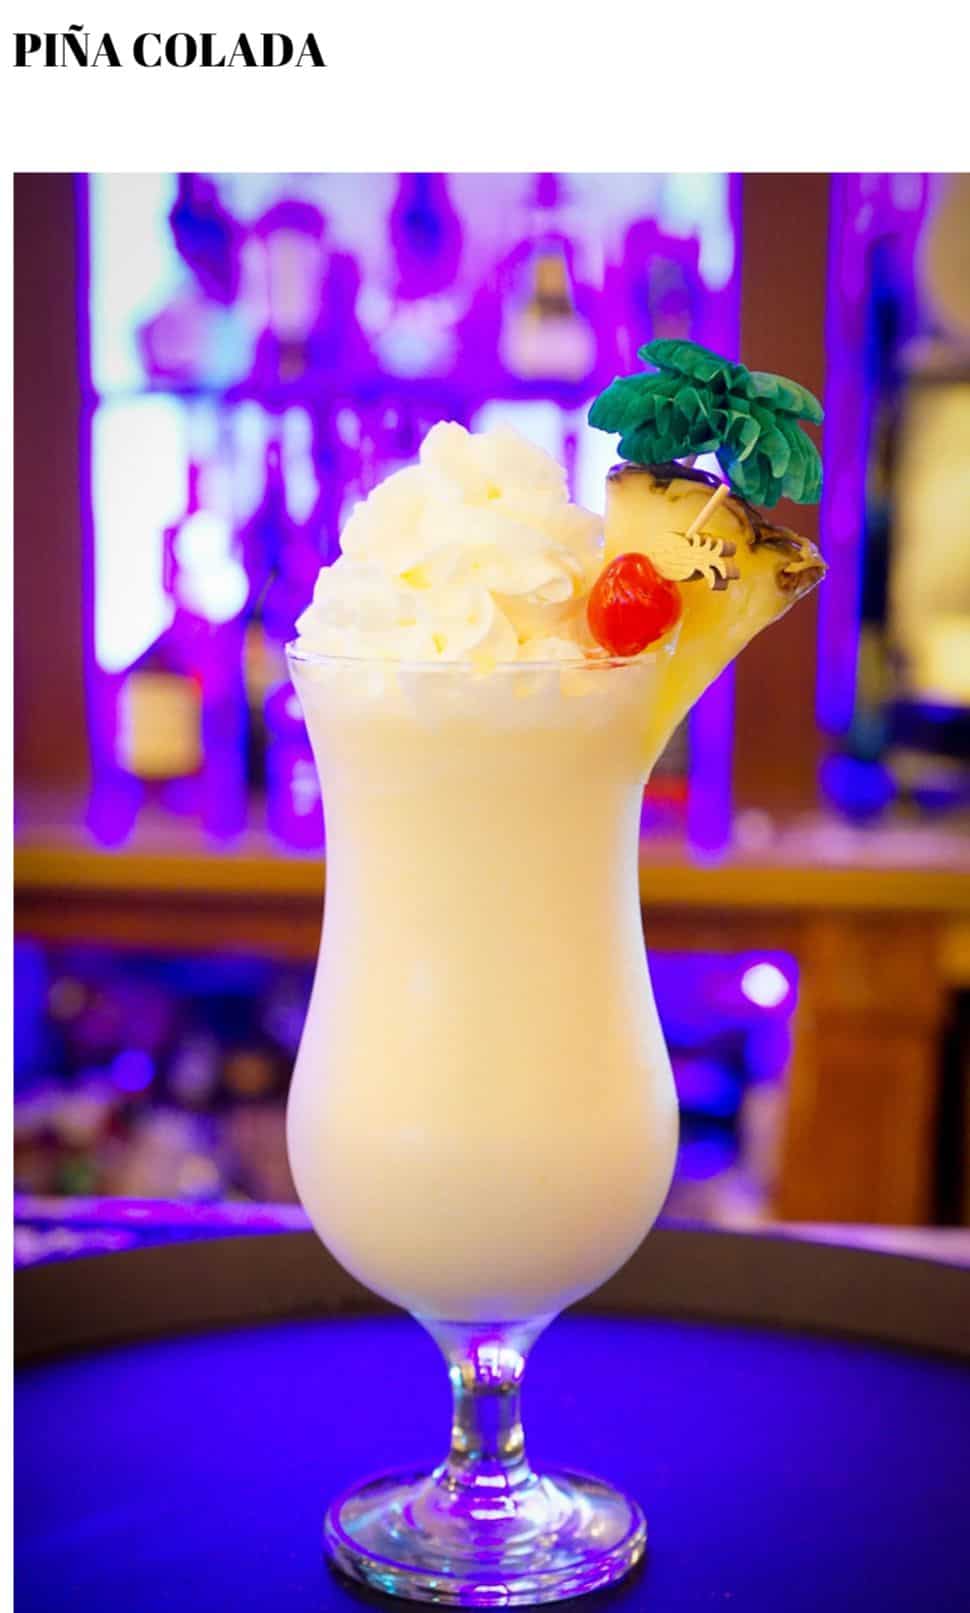 A glass of white liquid with a pineapple and a cherry on top.